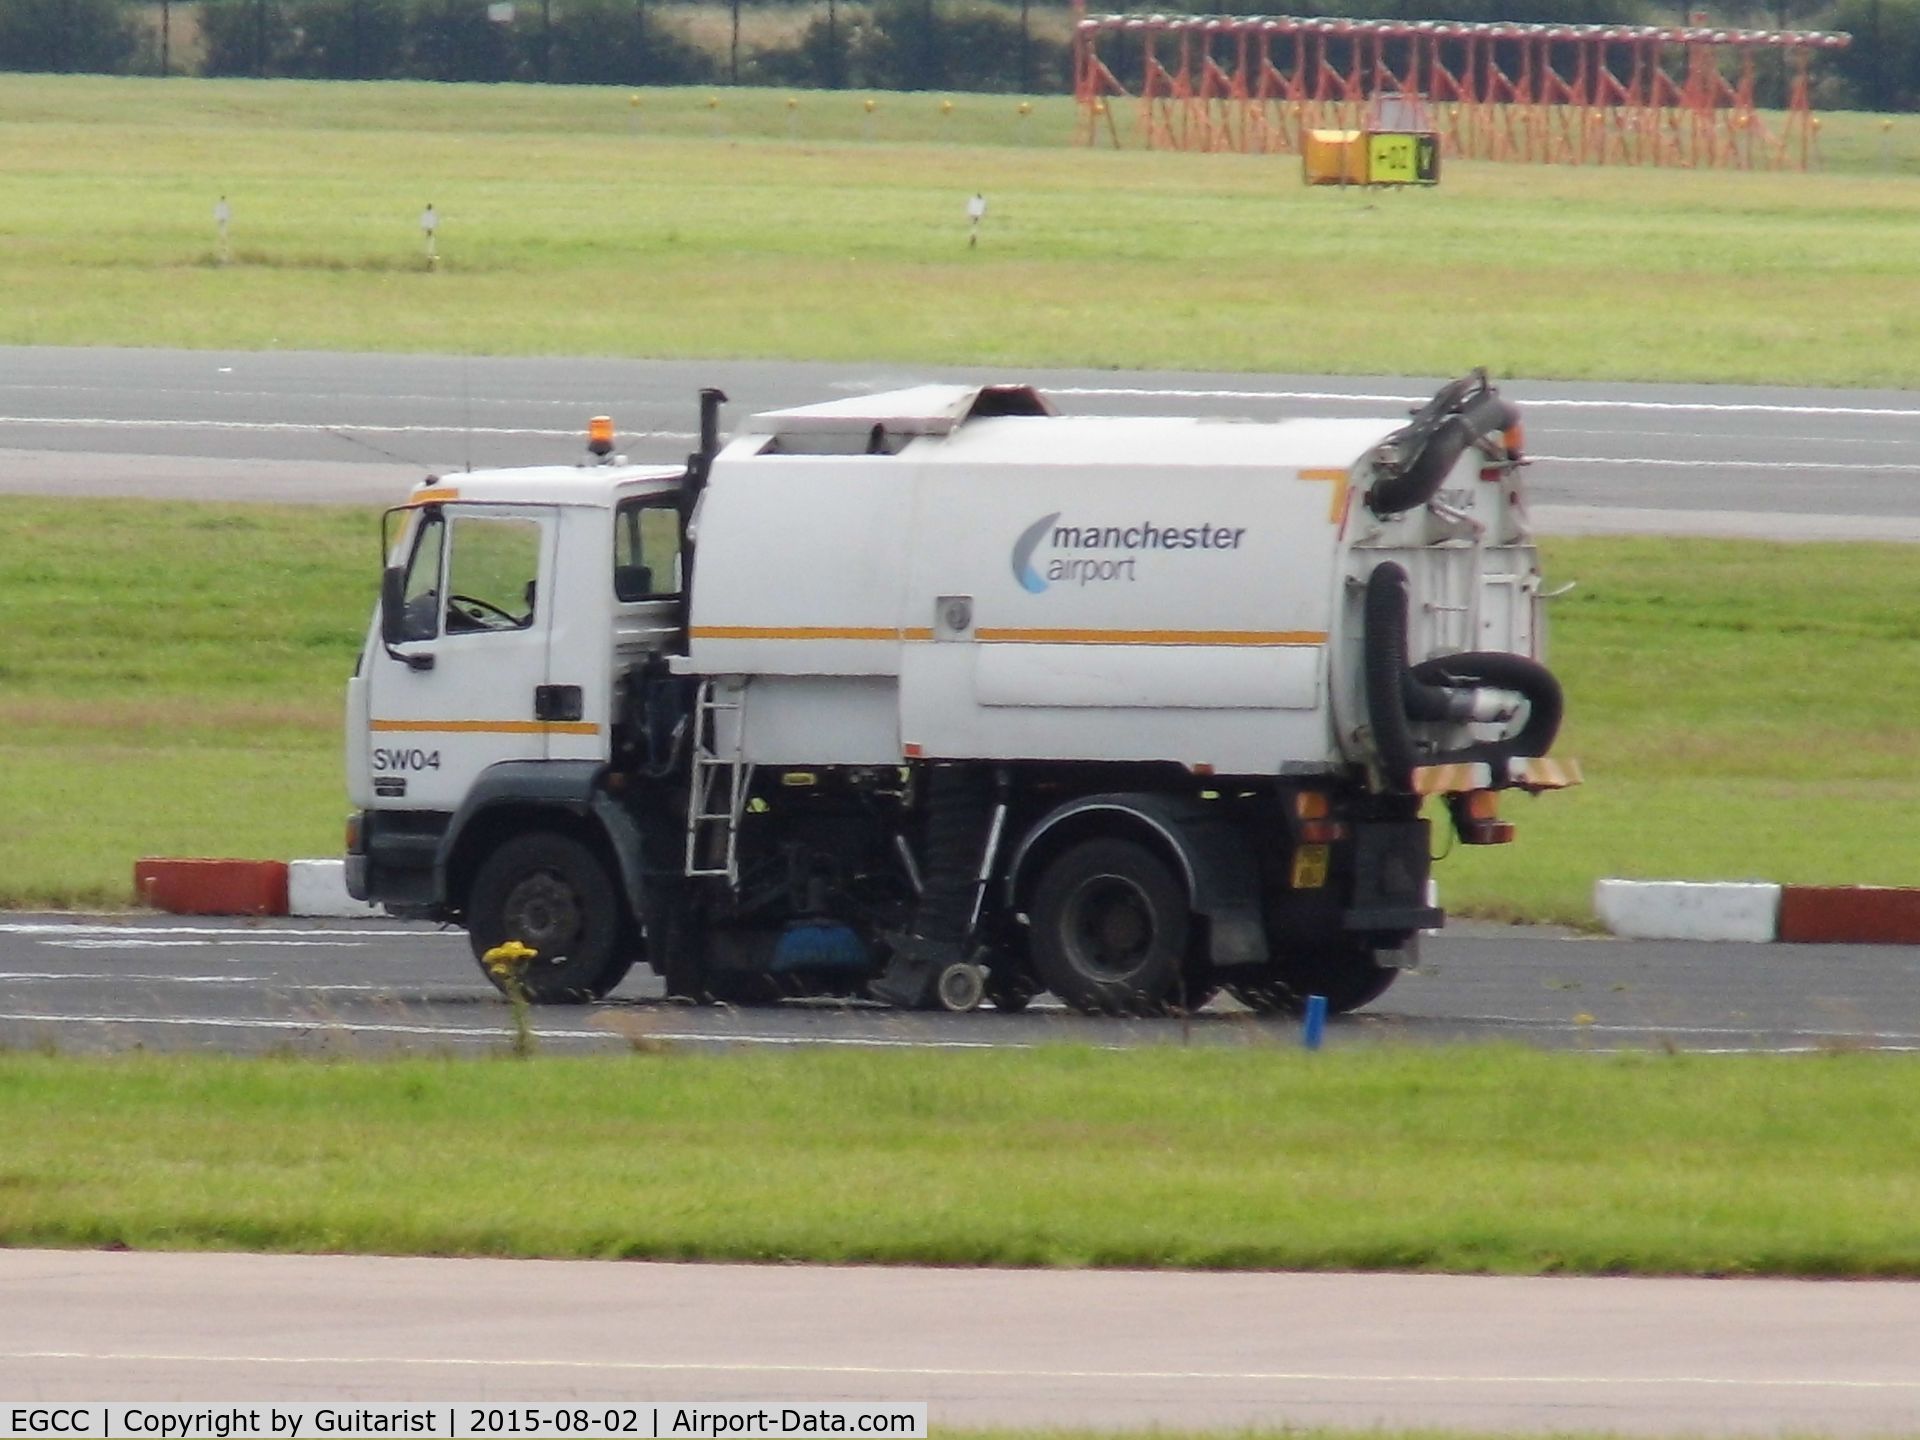 Manchester Airport, Manchester, England United Kingdom (EGCC) - Airfield ops vehicle at Manchester